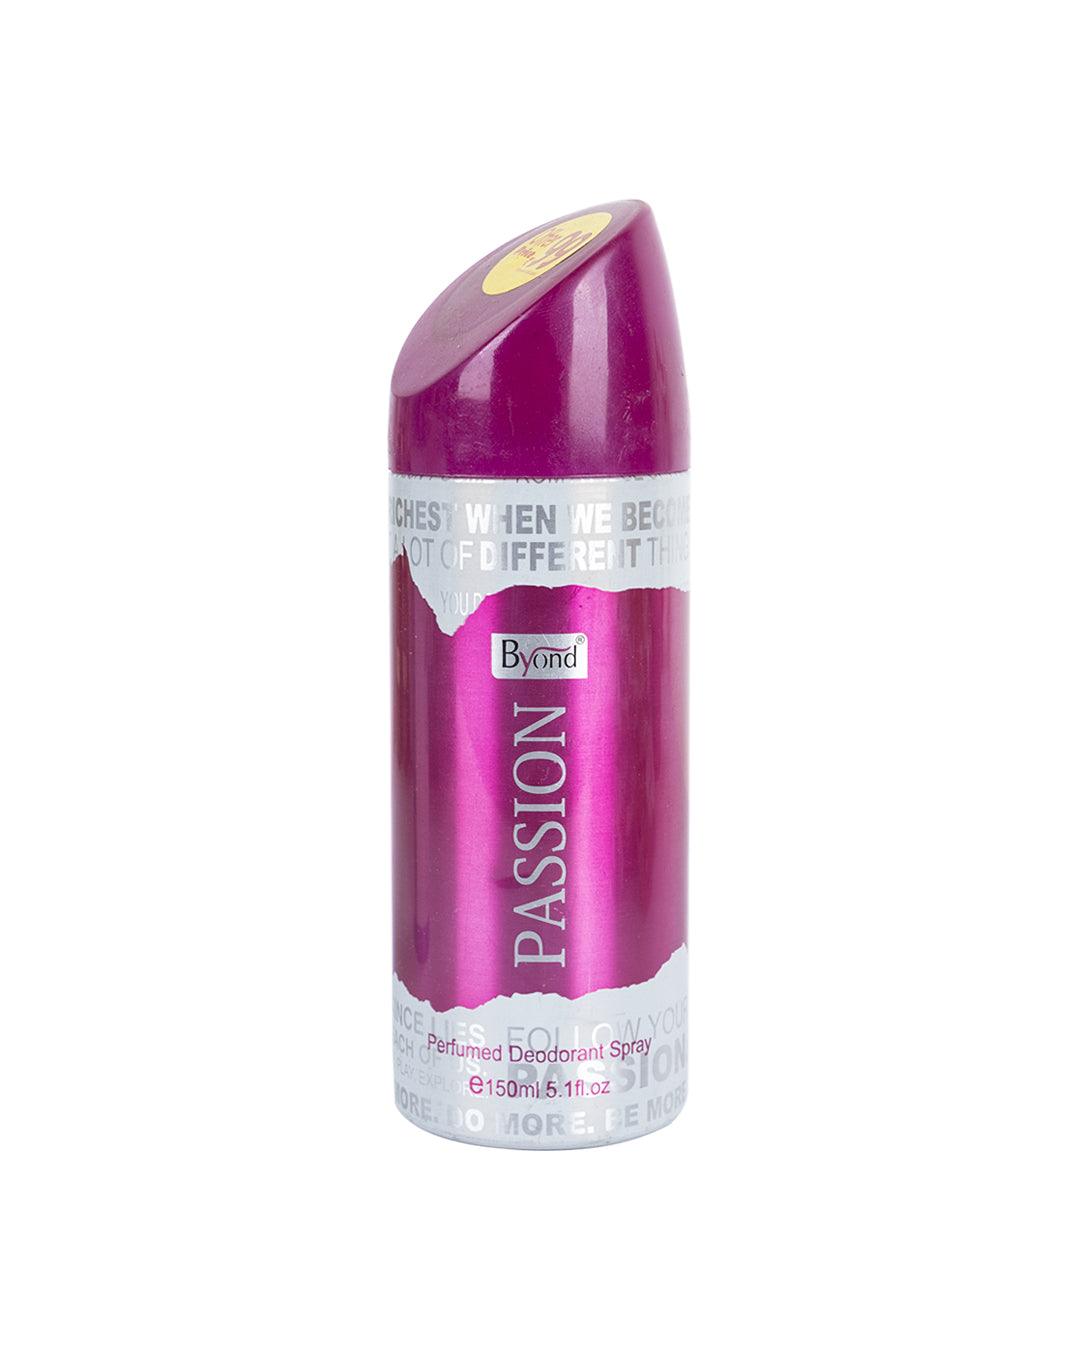 Byond Passion Deo + Sports Deo (Pack Of 2, Each 150mL) - MARKET 99